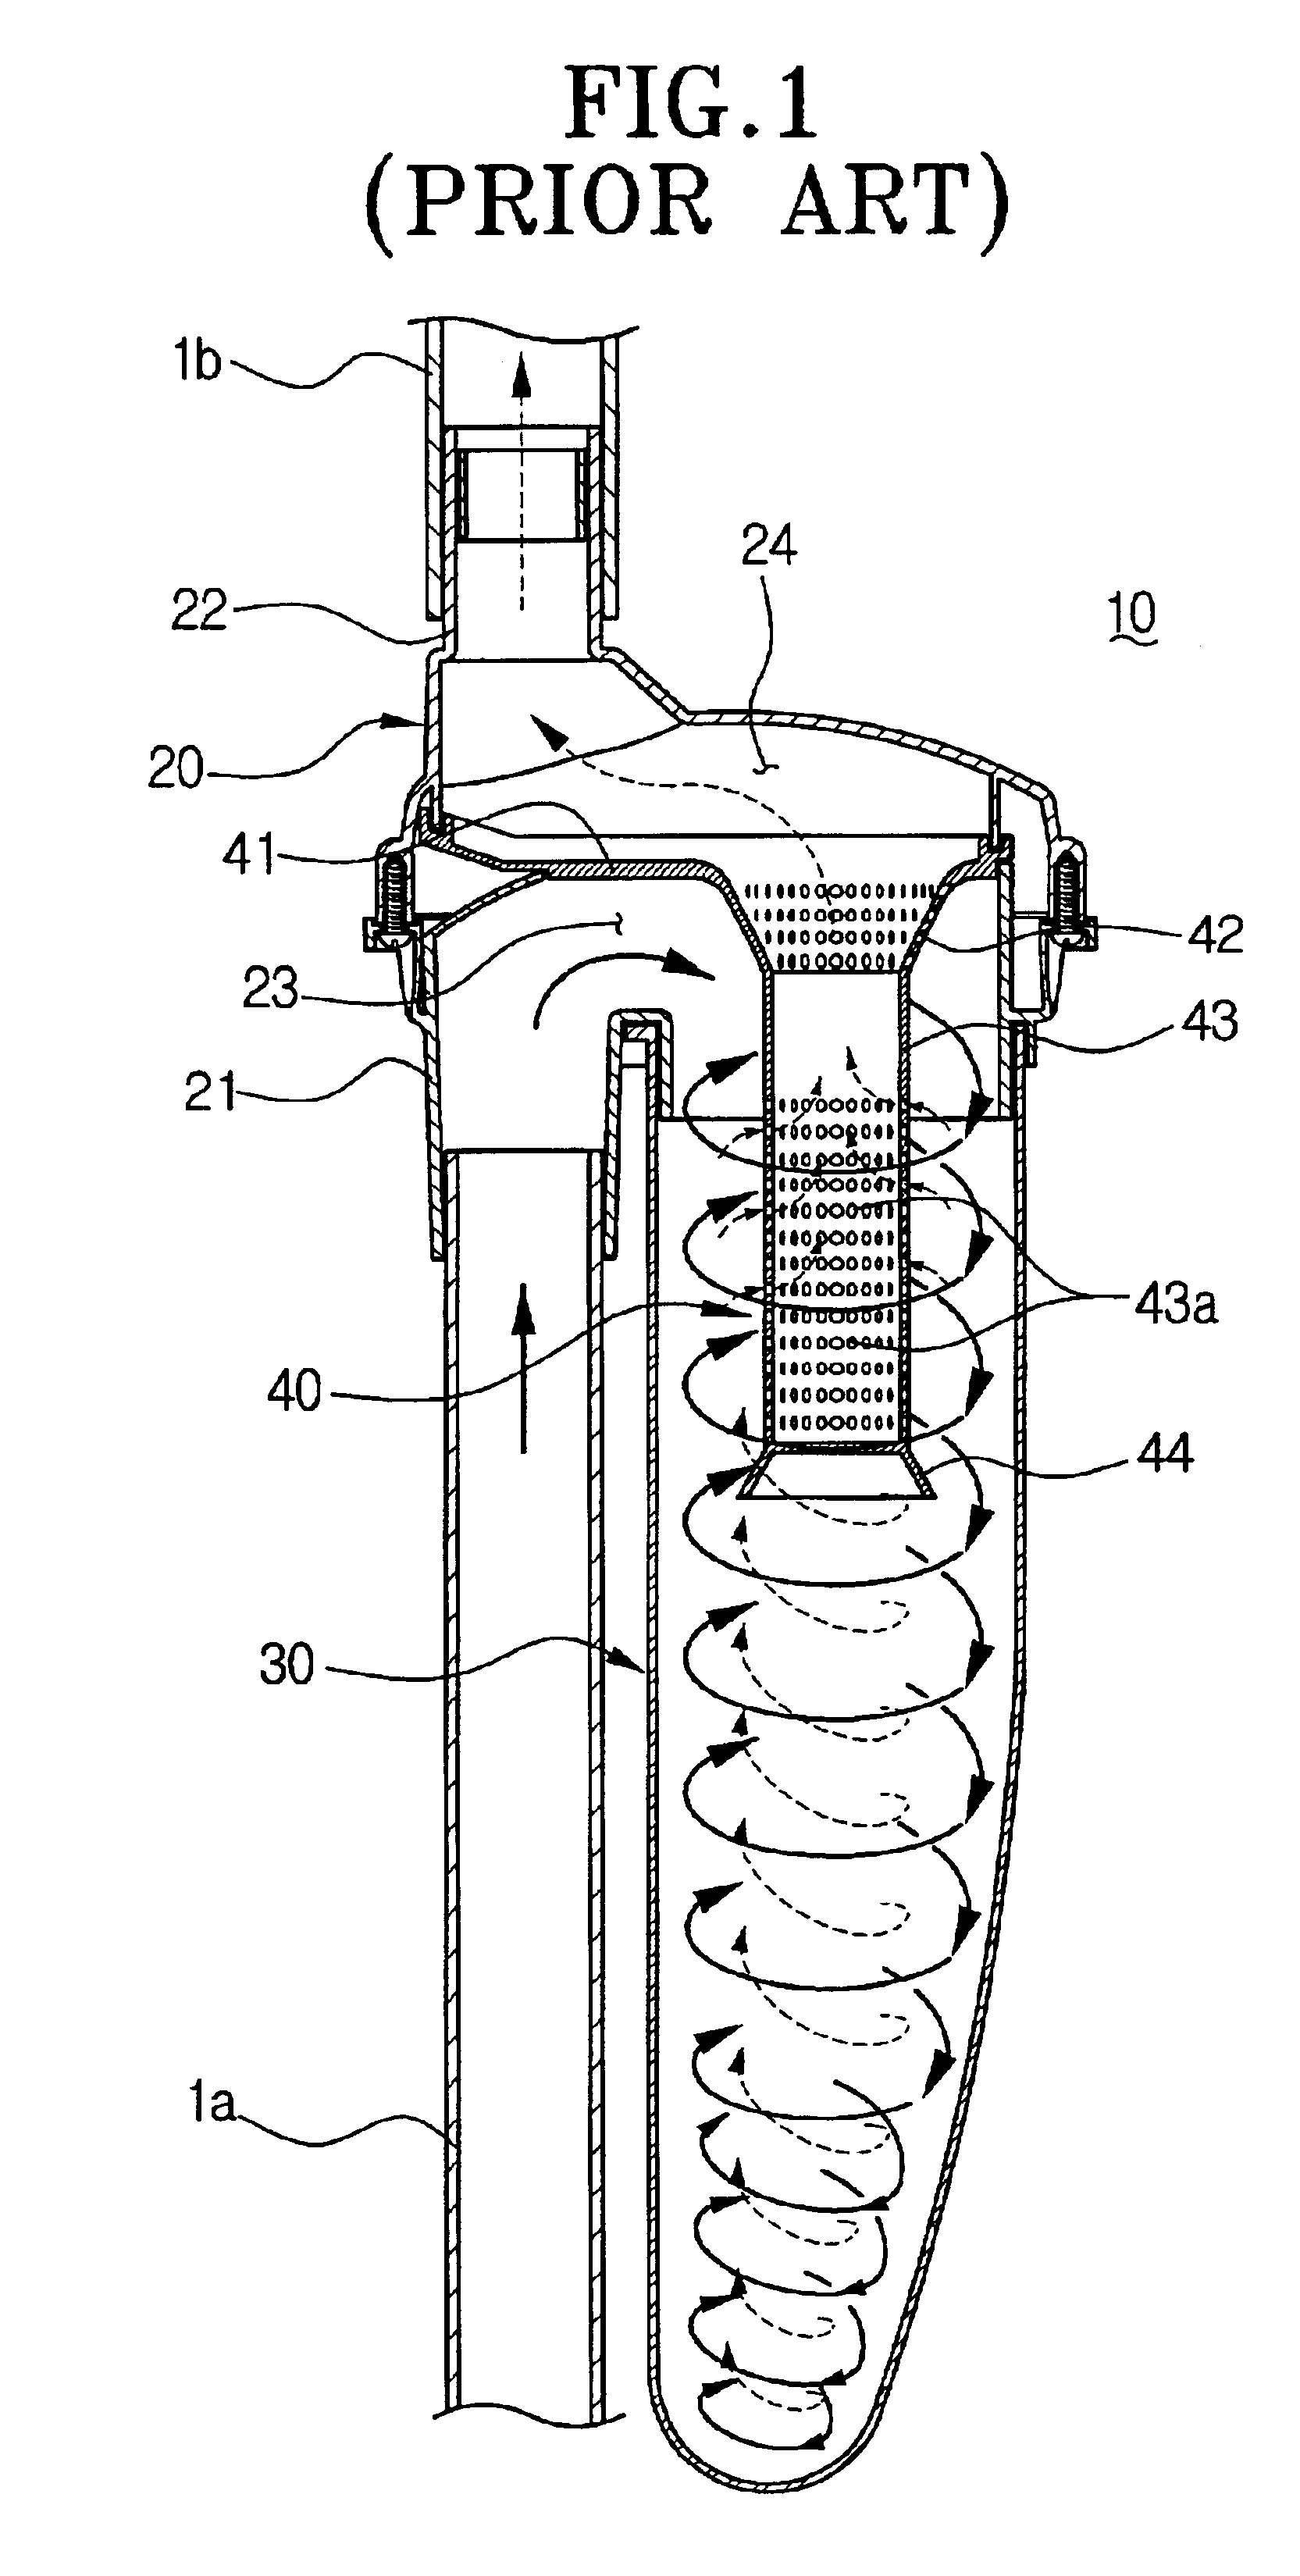 Grill assembly for a cyclone-type dust collecting apparatus for a vacuum cleaner